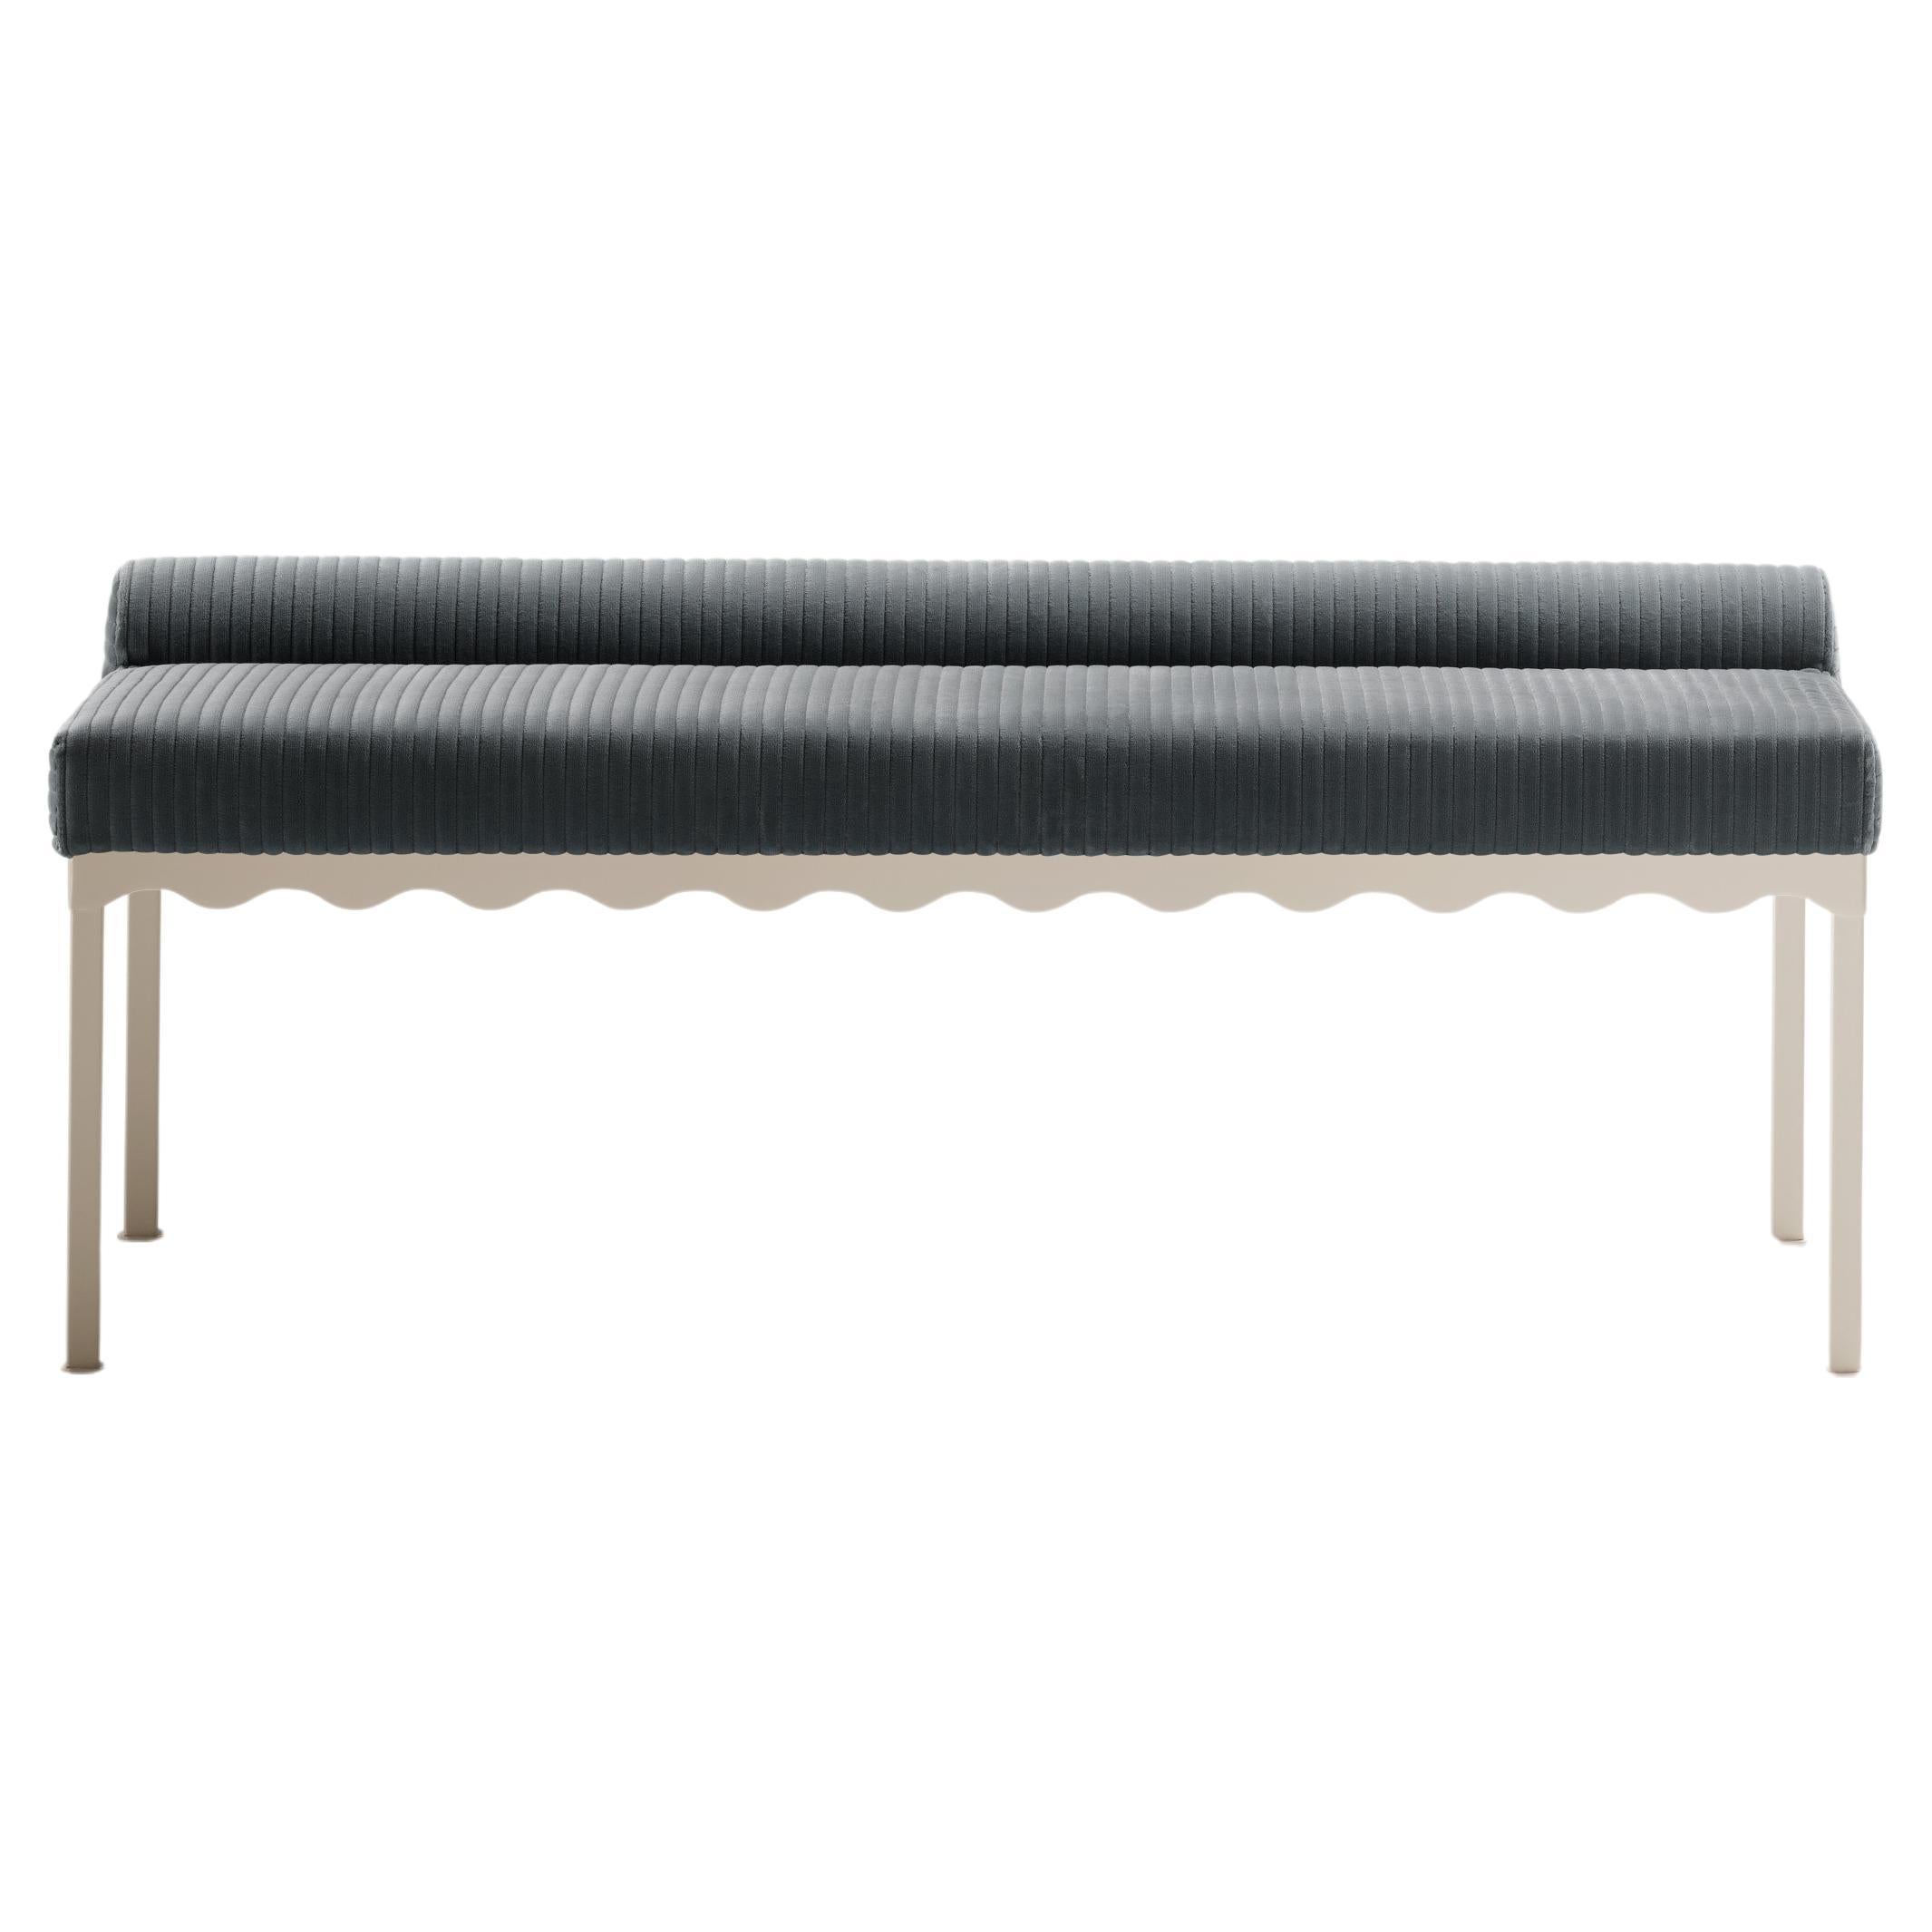 Marmoset Bellini 1340 Bench by Coco Flip For Sale